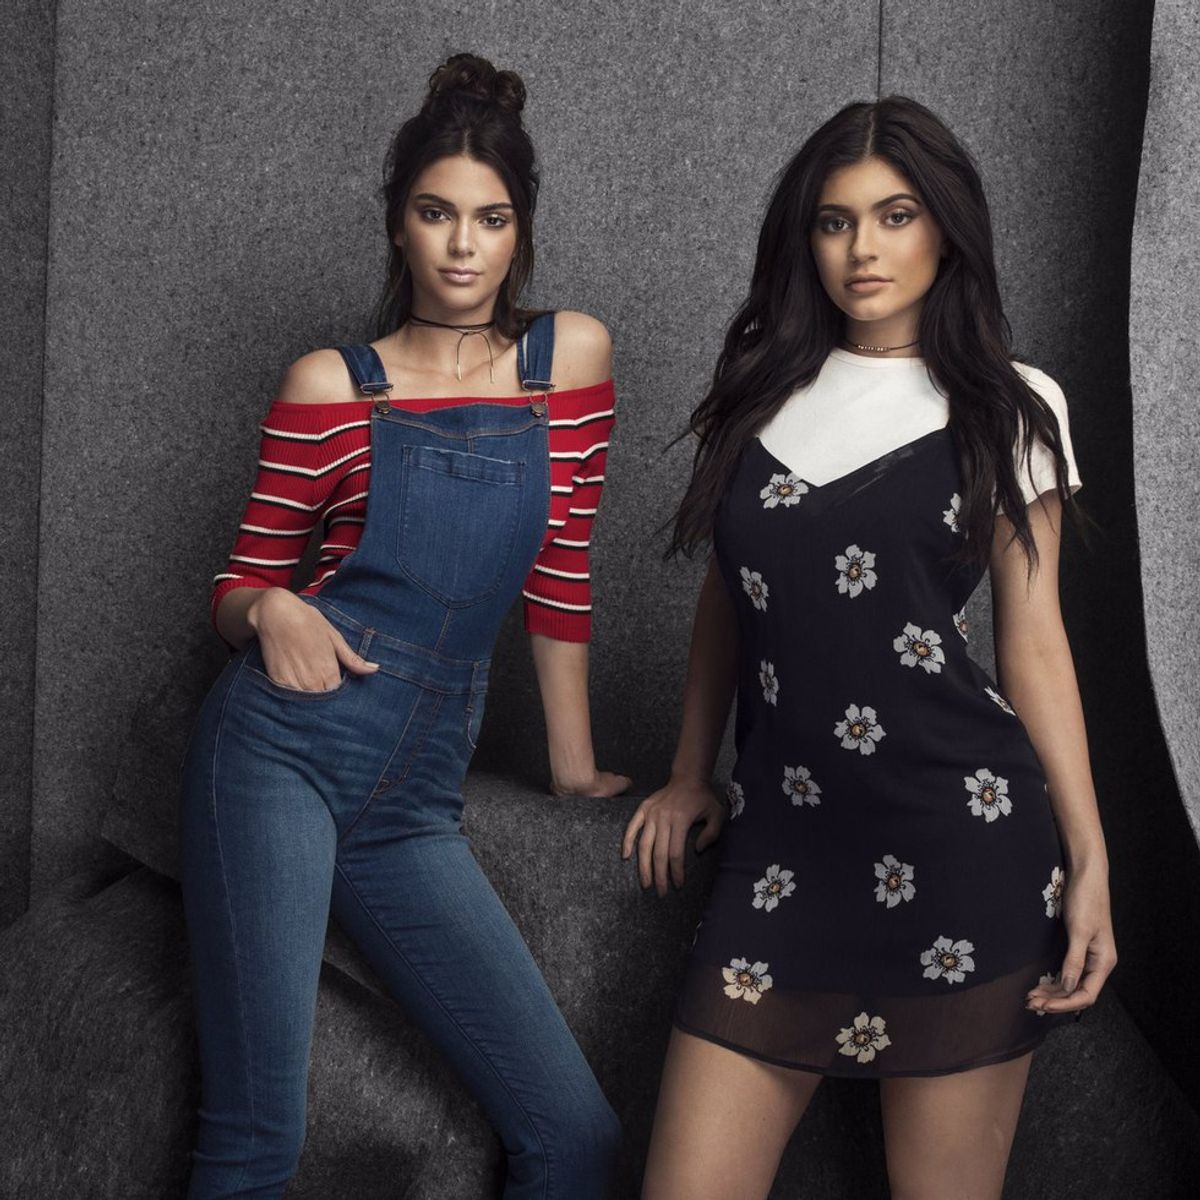 16 Iconic Duos That Put Kendall And Kylie To Shame